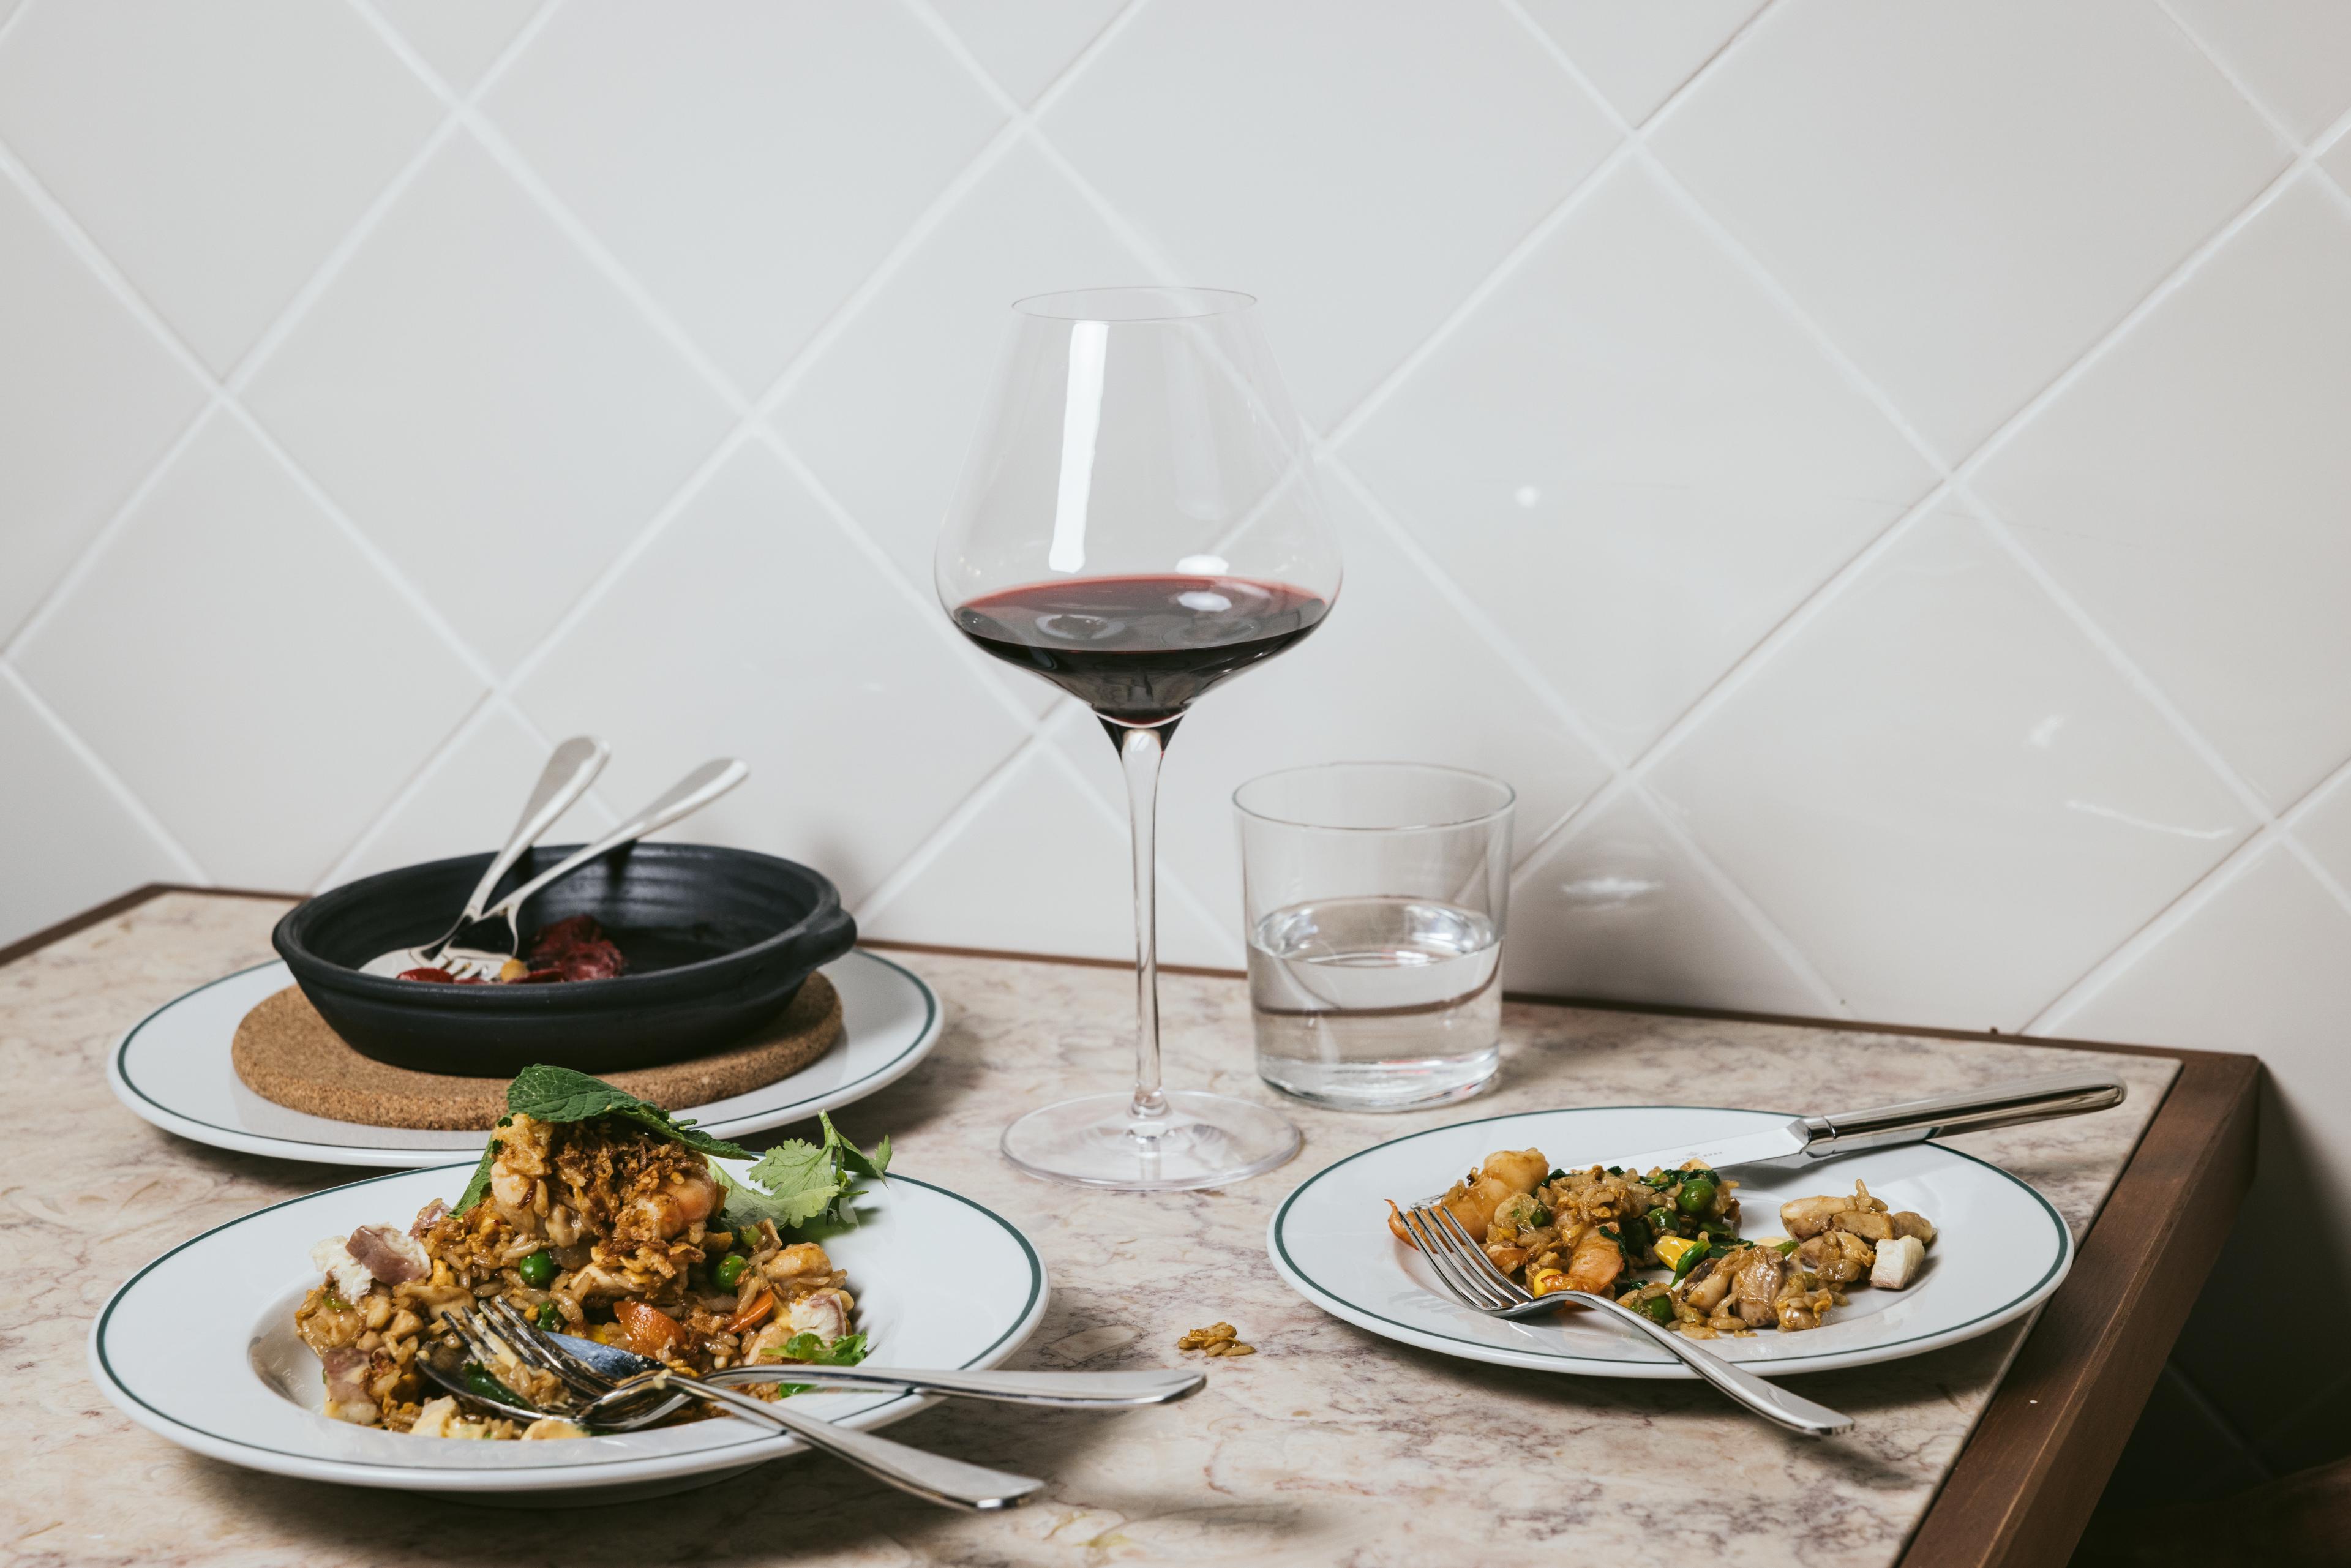 Plates of food on a tabletop with a glass of red wine 